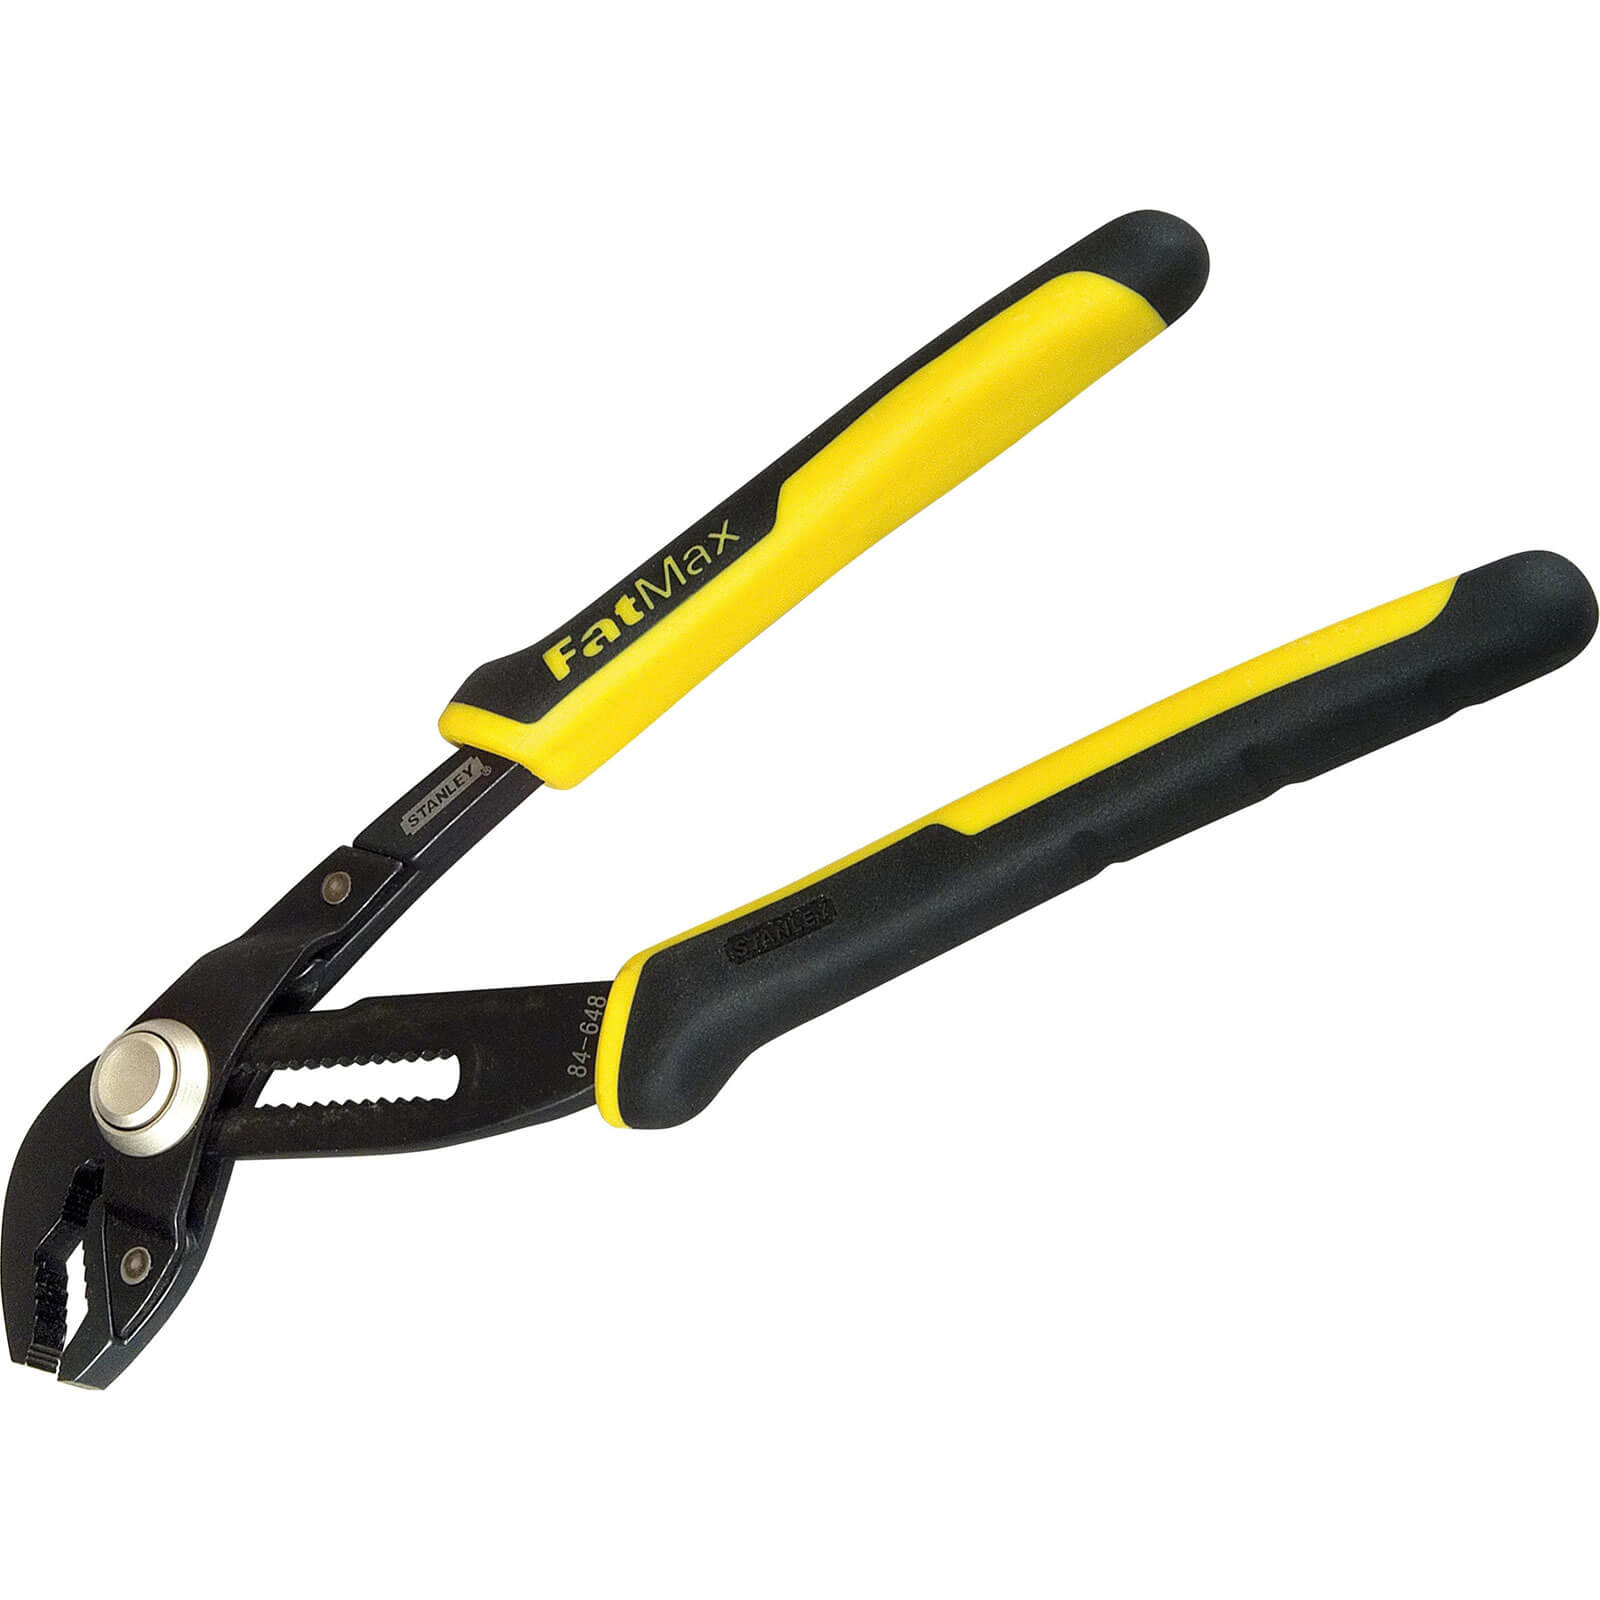 Stanley Fat Max Plumbers Groove Joint Pliers 250mm